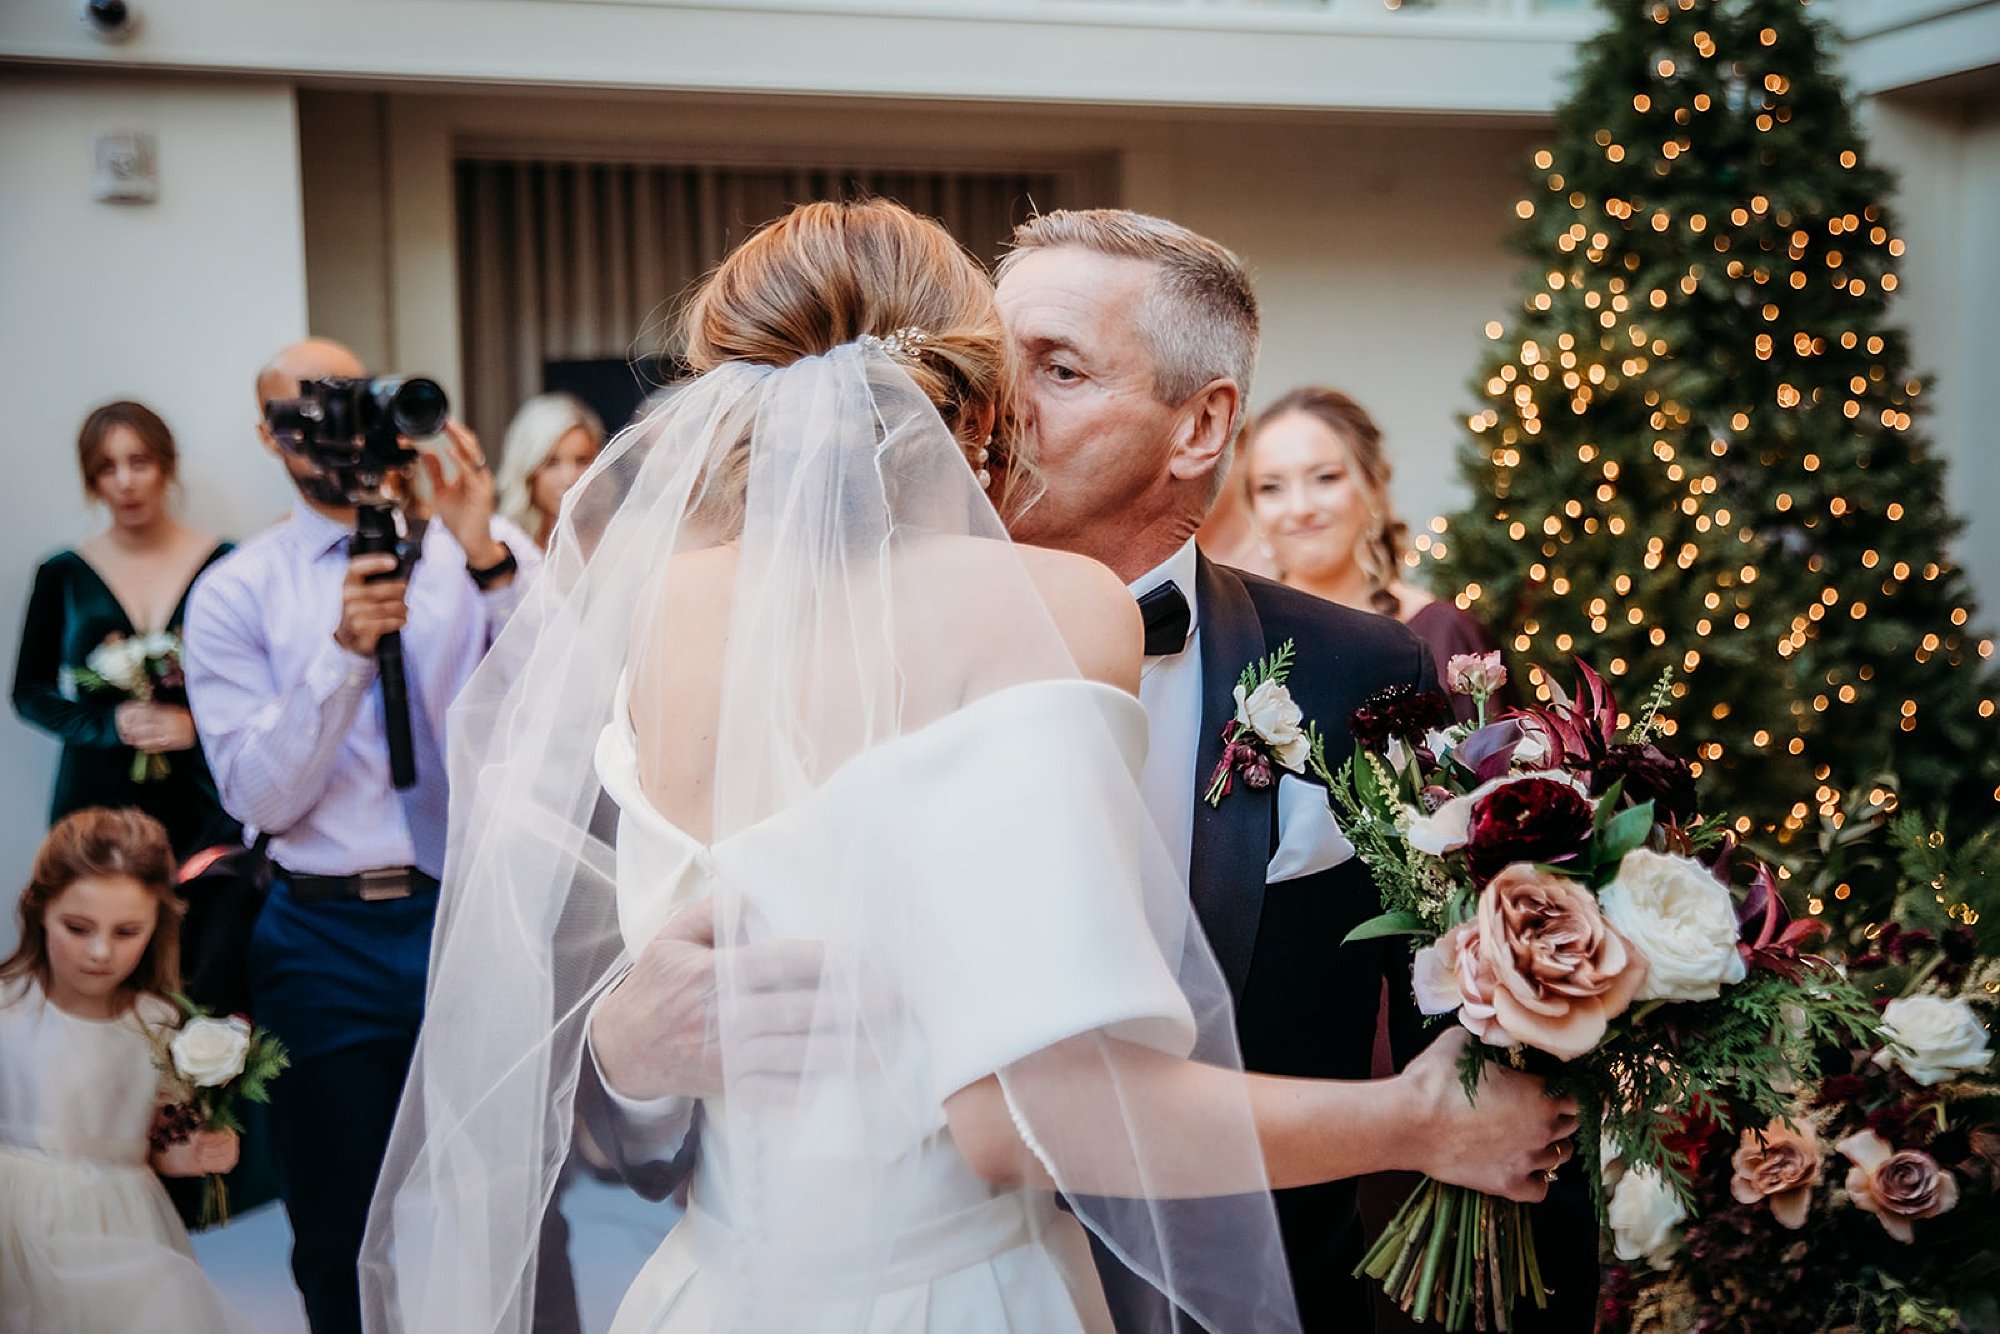 father kisses bride's cheek at end of aisle